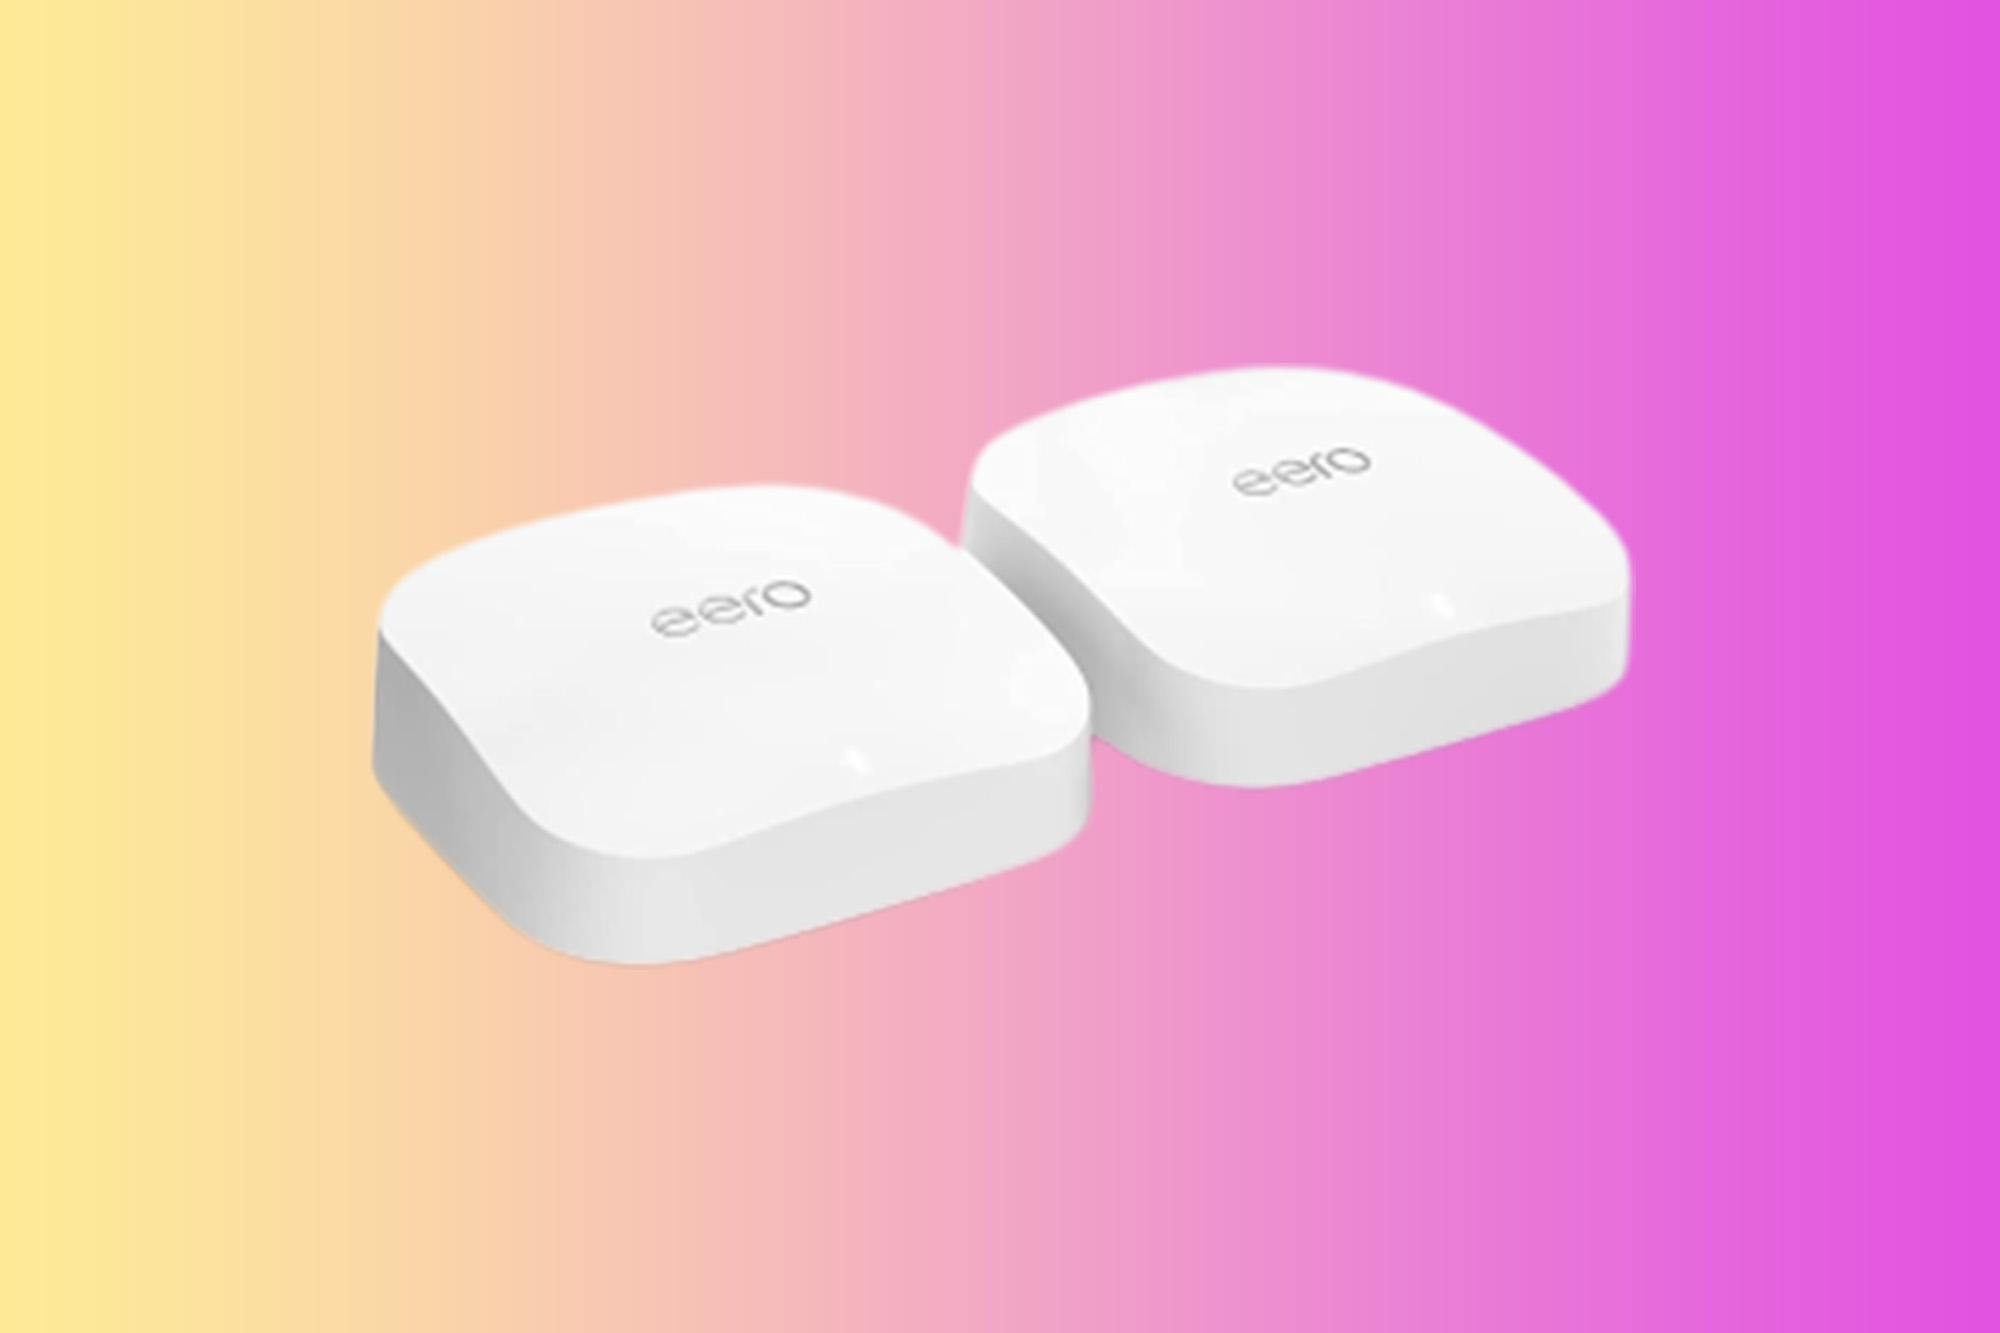 Save up to 30% and bring internet dark spots into the light with Amazon eero mesh WiFi routers